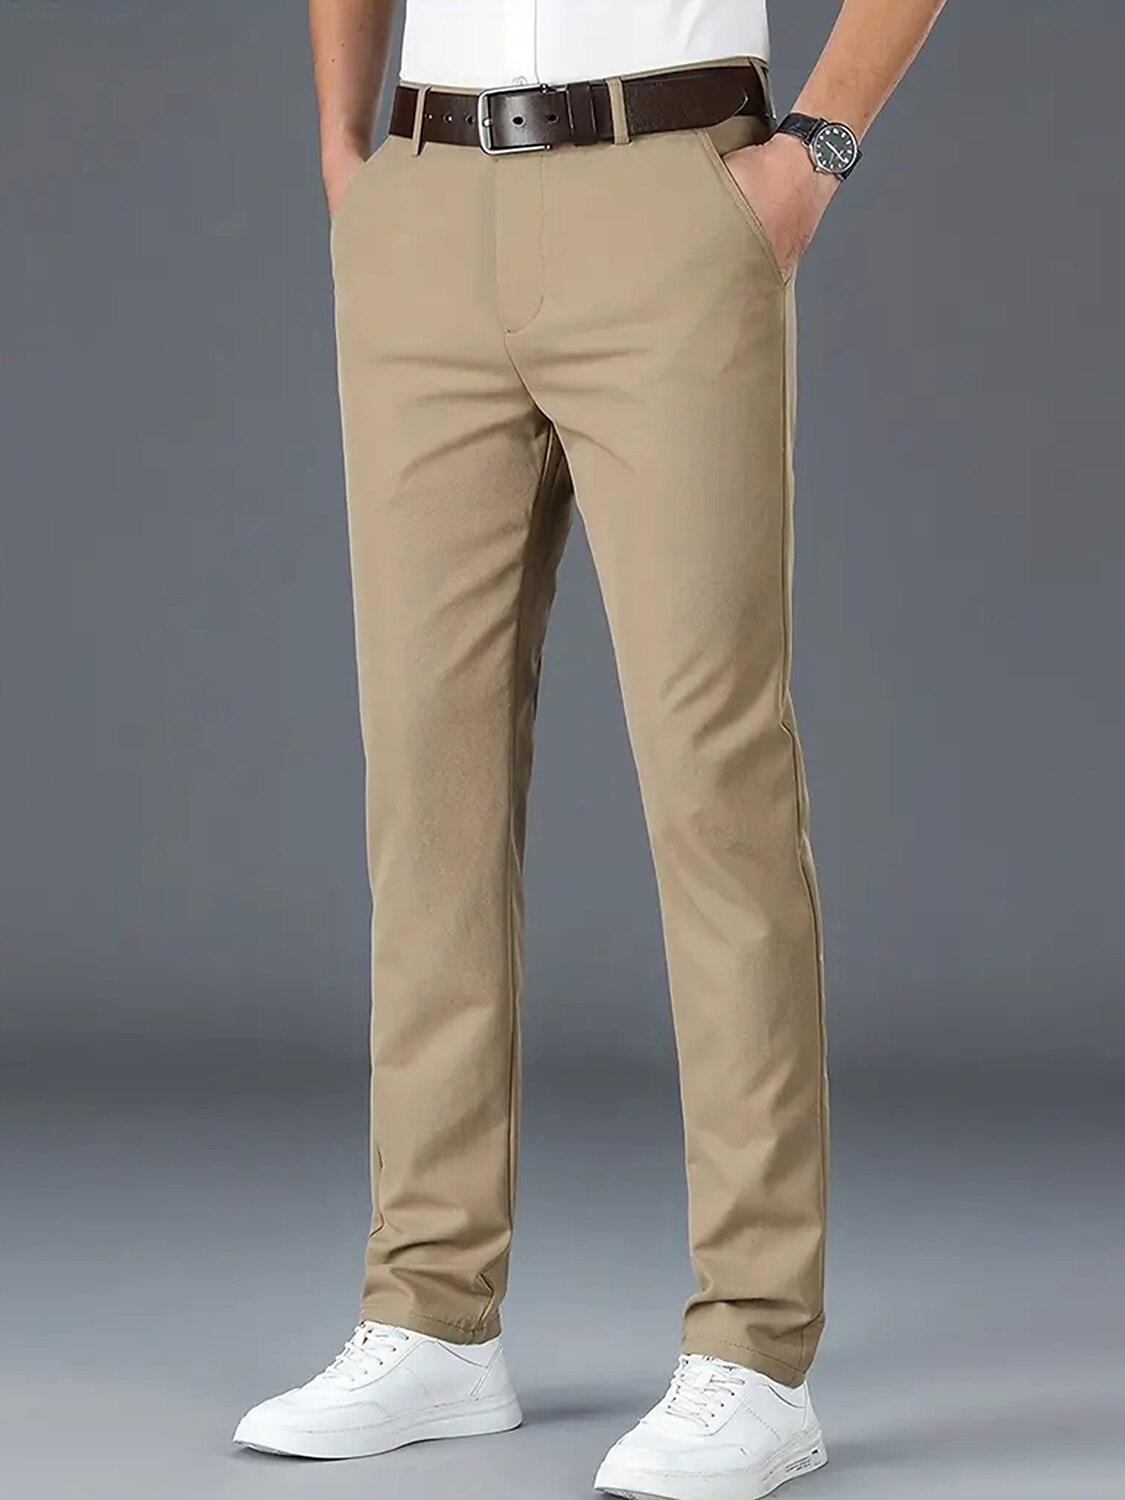 Men's Chinos Chino Pants Pocket Plain Comfort Breathable Outdoor Daily Going out 100% Cotton Fashion Casual Trousers 